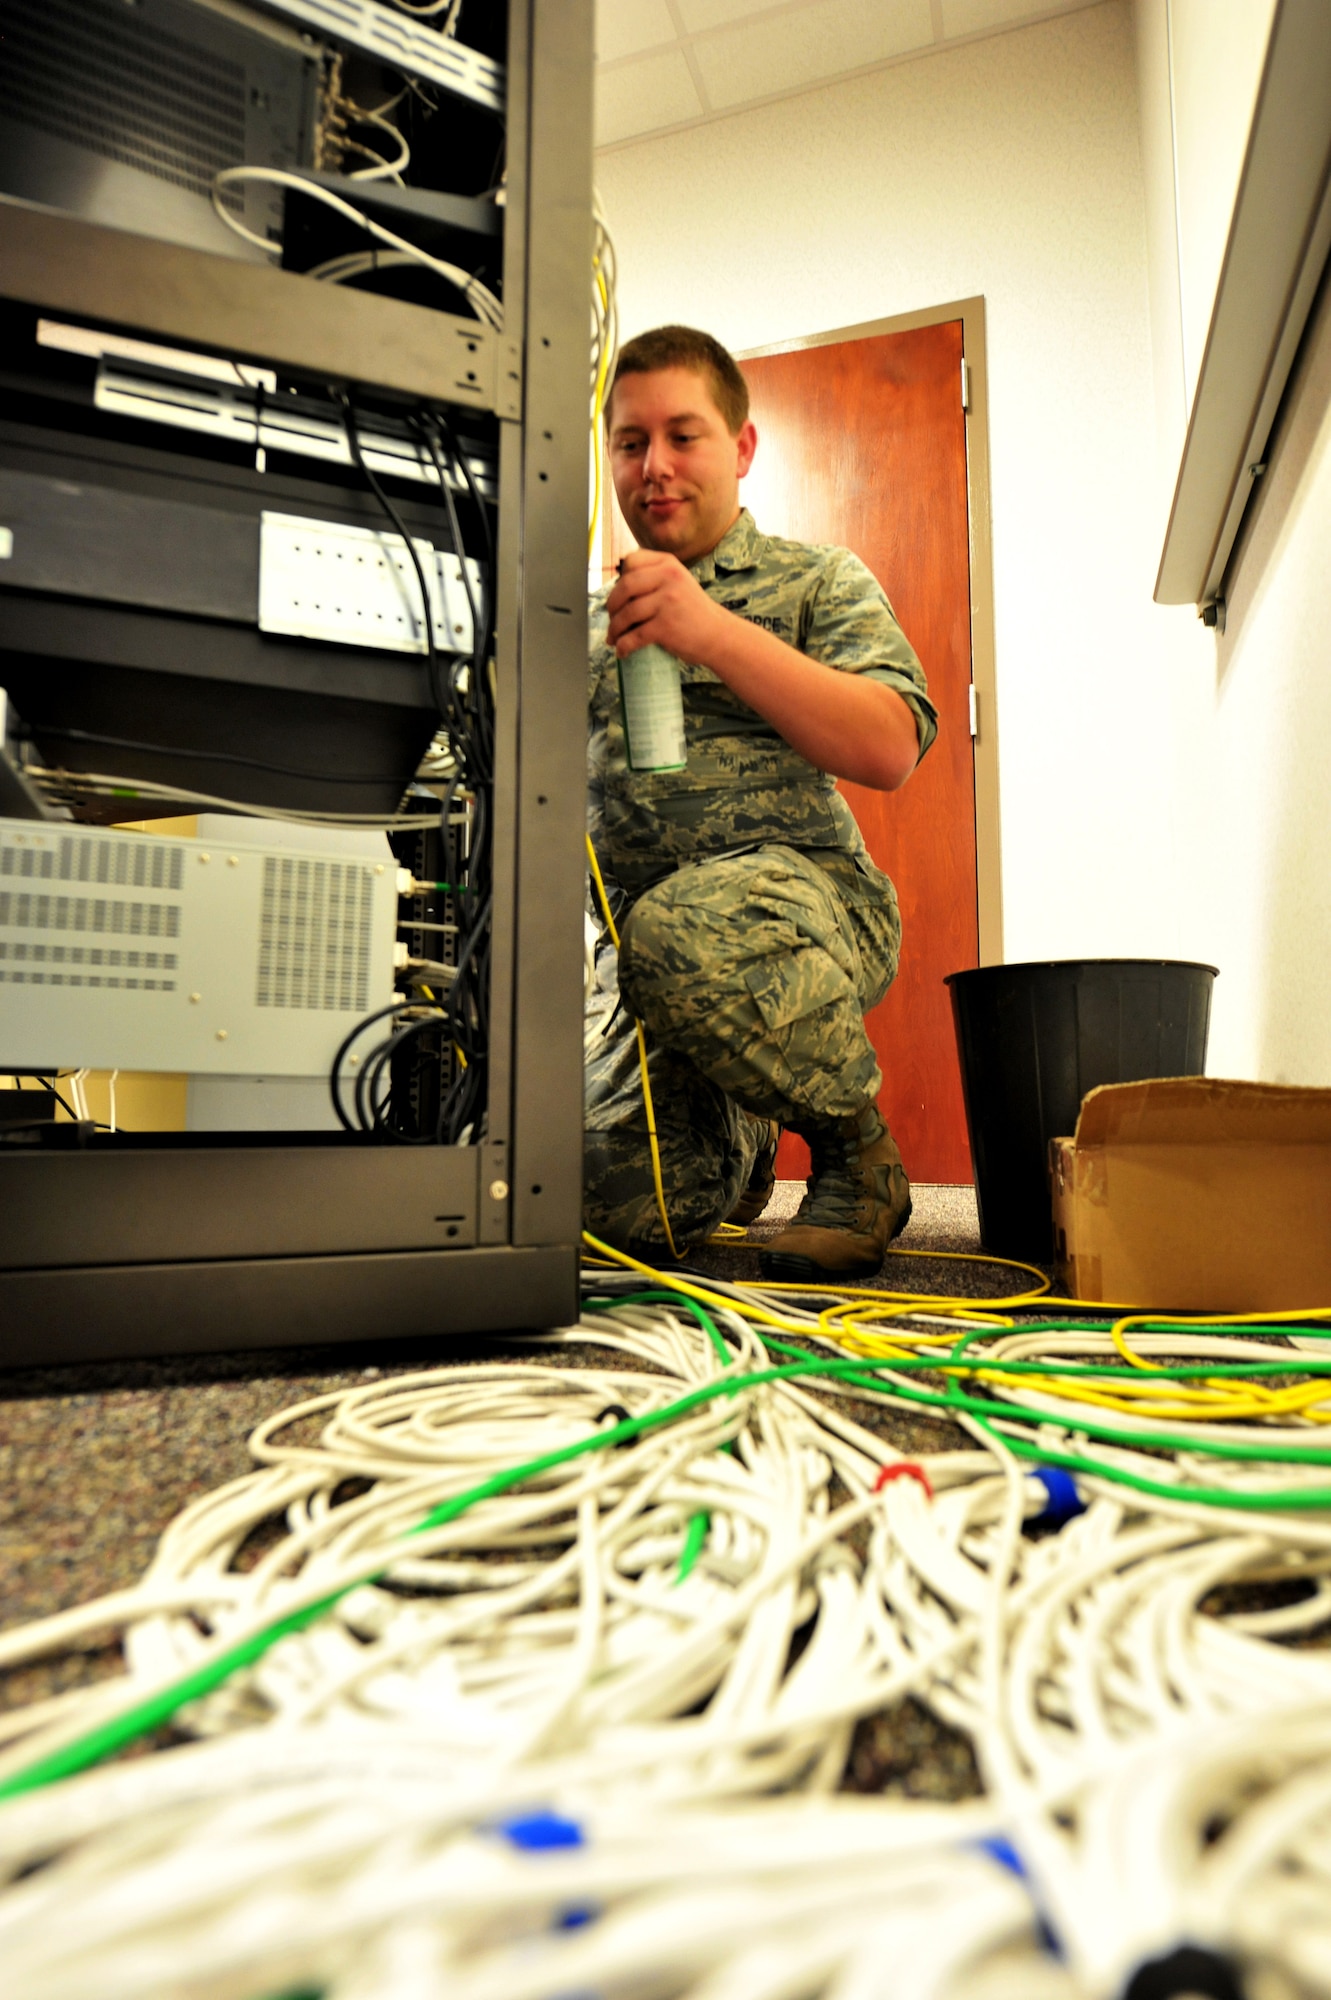 Senior Airman Lee Owens, former 42nd Air Base Wing broadcast engineer, sprays compressed air on television equipment, July 24, 2014. After entering the Air Force at age 22, Owens is rejoining the civilian workforce. The Massachusetts native is one of more than 3,500 Airmen selected for separation during the first Quality Force Review Board. (U.S. Air Force photo by Master Sgt. Michael Voss)  